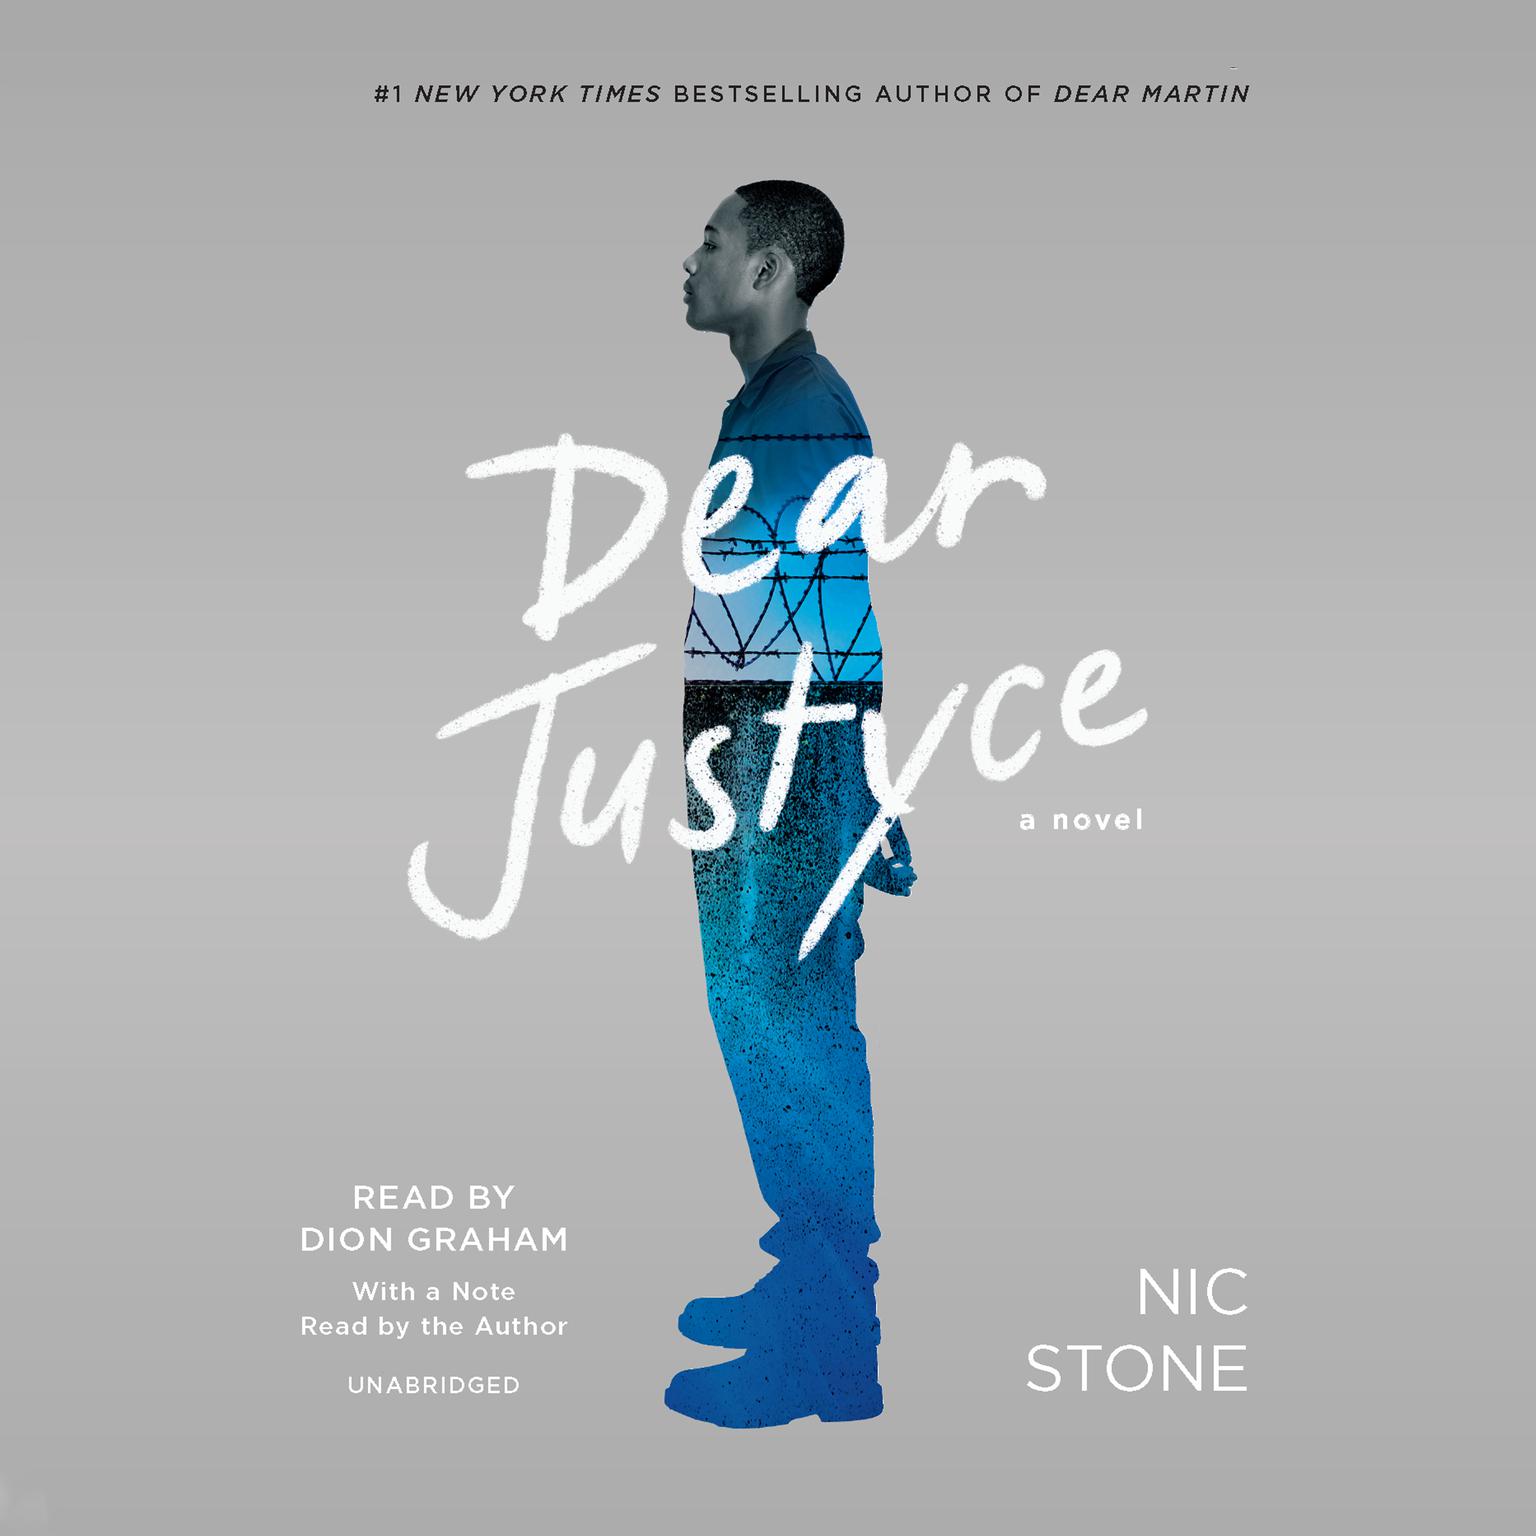 Dear Justyce Audiobook, by Nic Stone